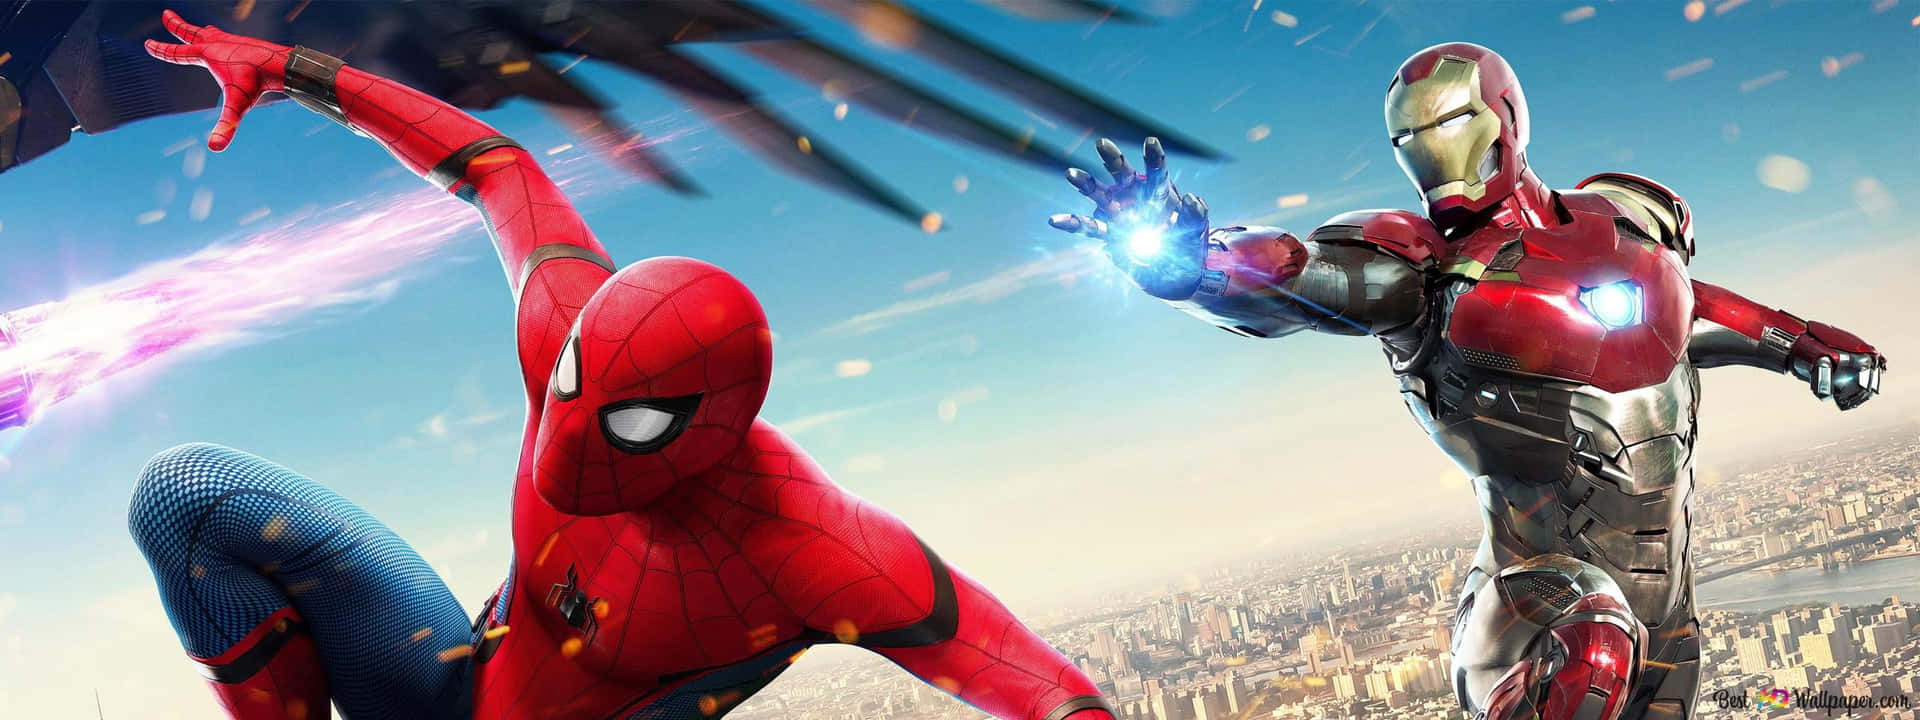 Marvel superheroes Spider Man and Iron Man team up to save the day. Wallpaper